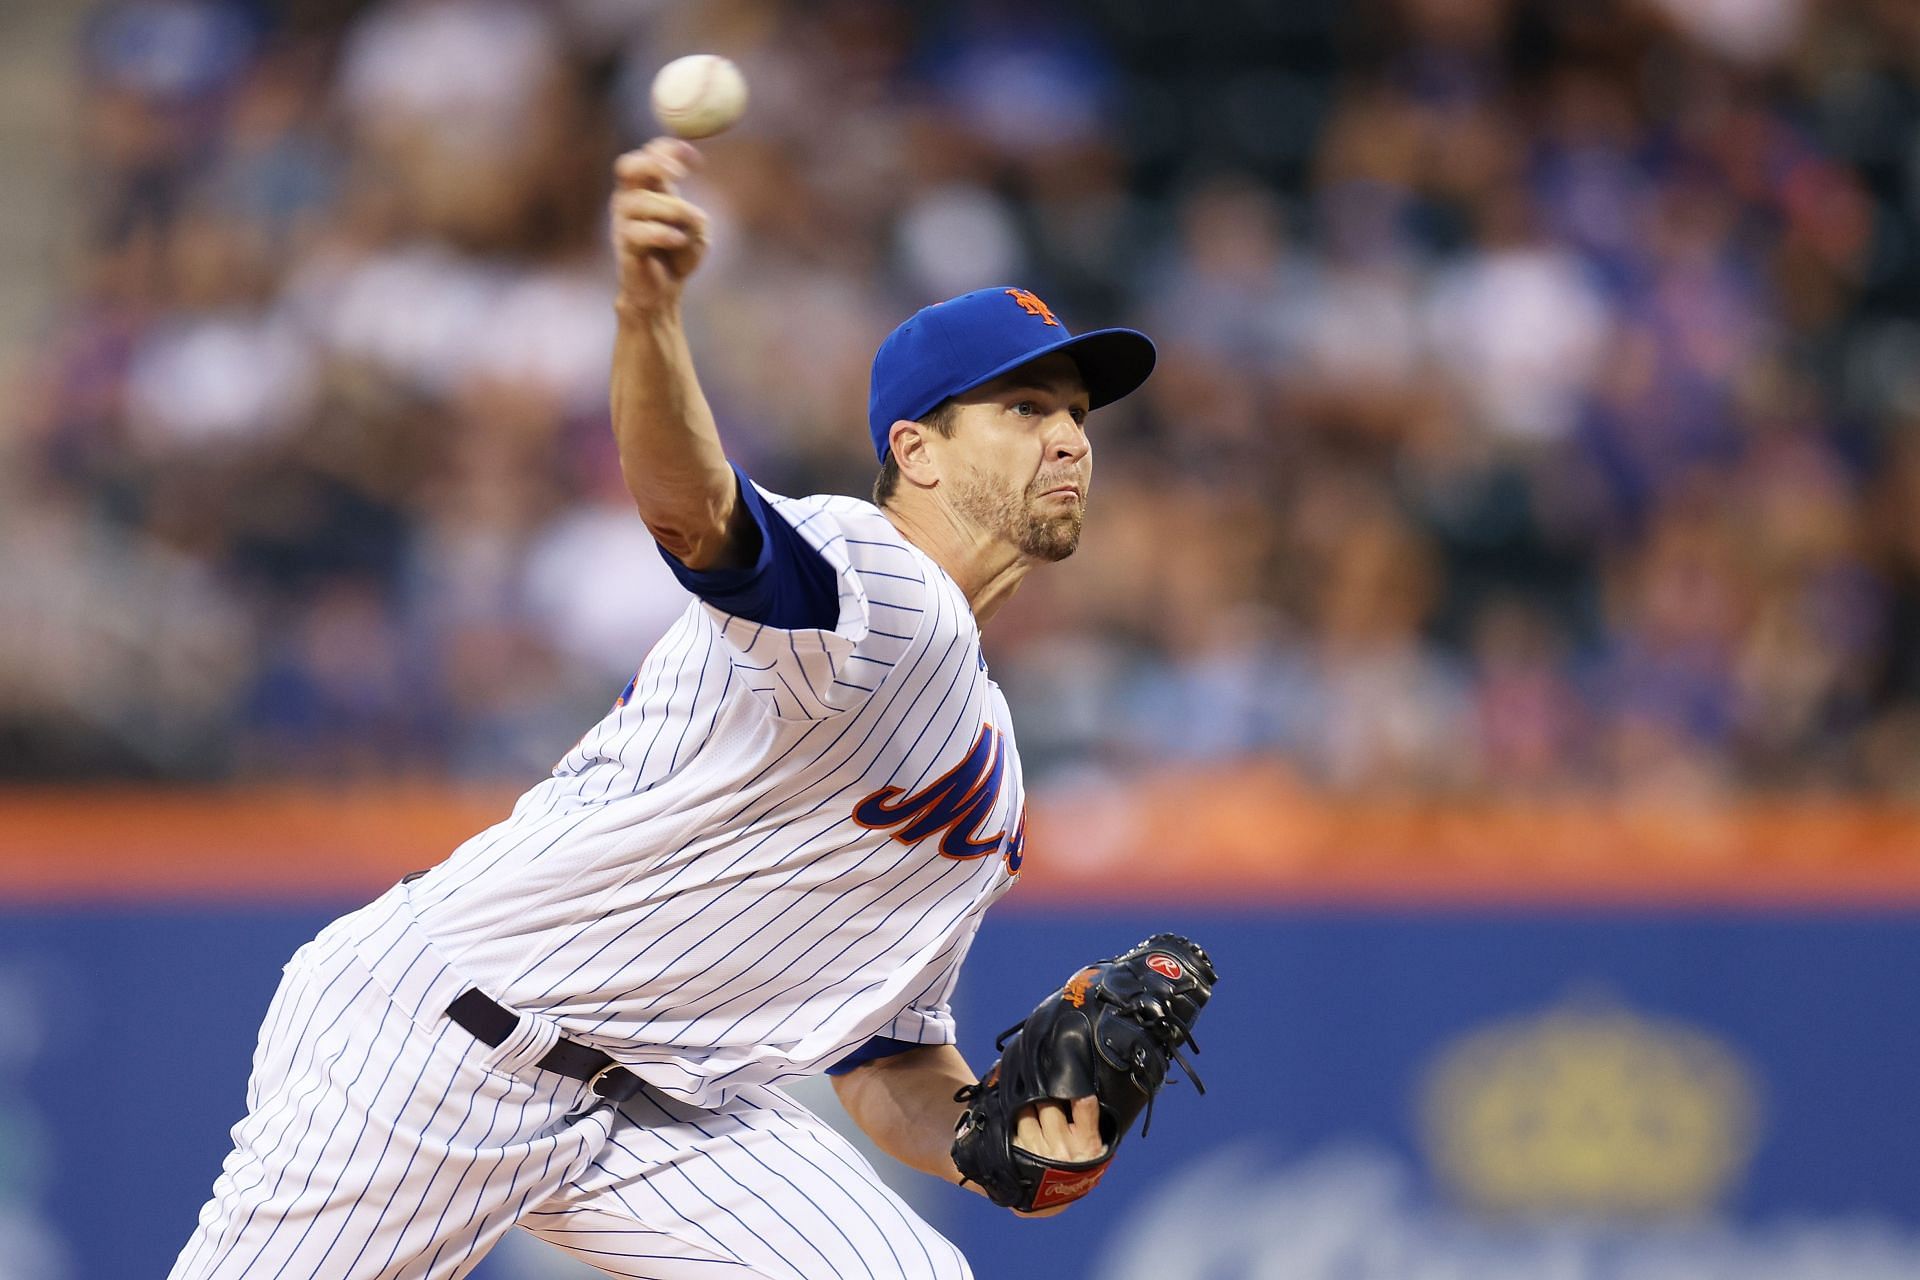 MLB - Jacob deGrom's season is officially over. He was